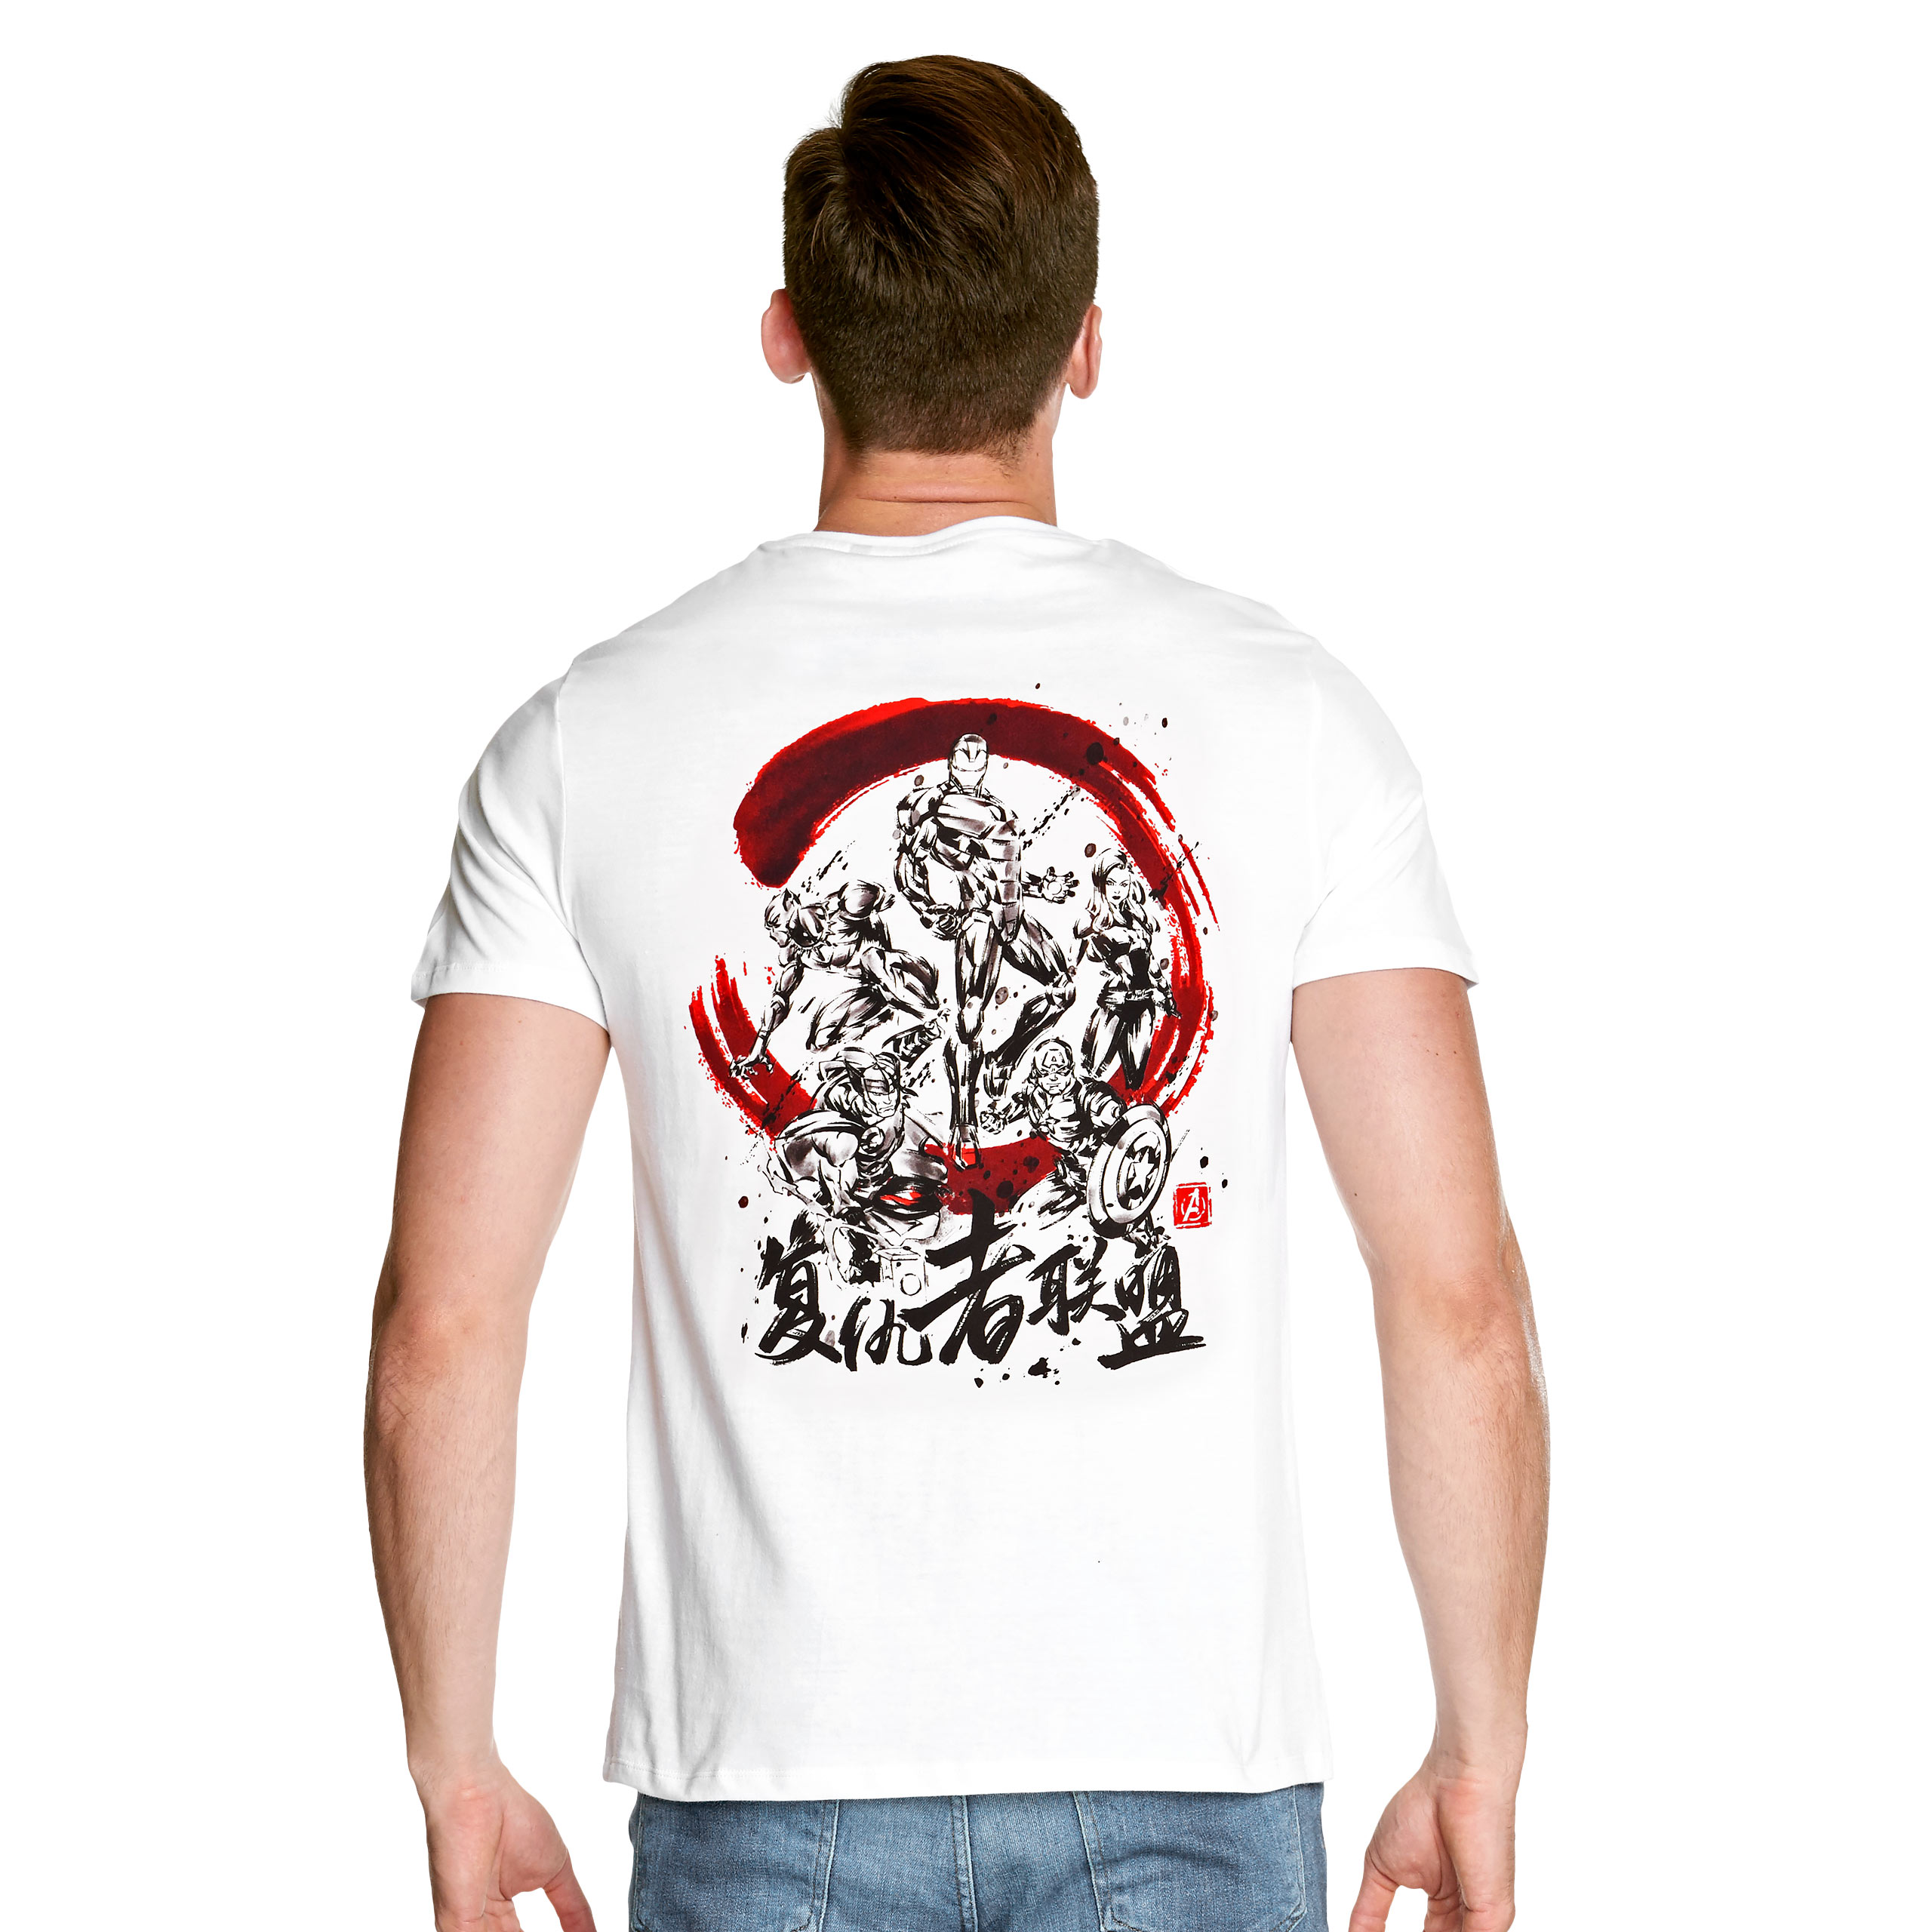 Marvel - Group Japanese Style T-Shirt weiß